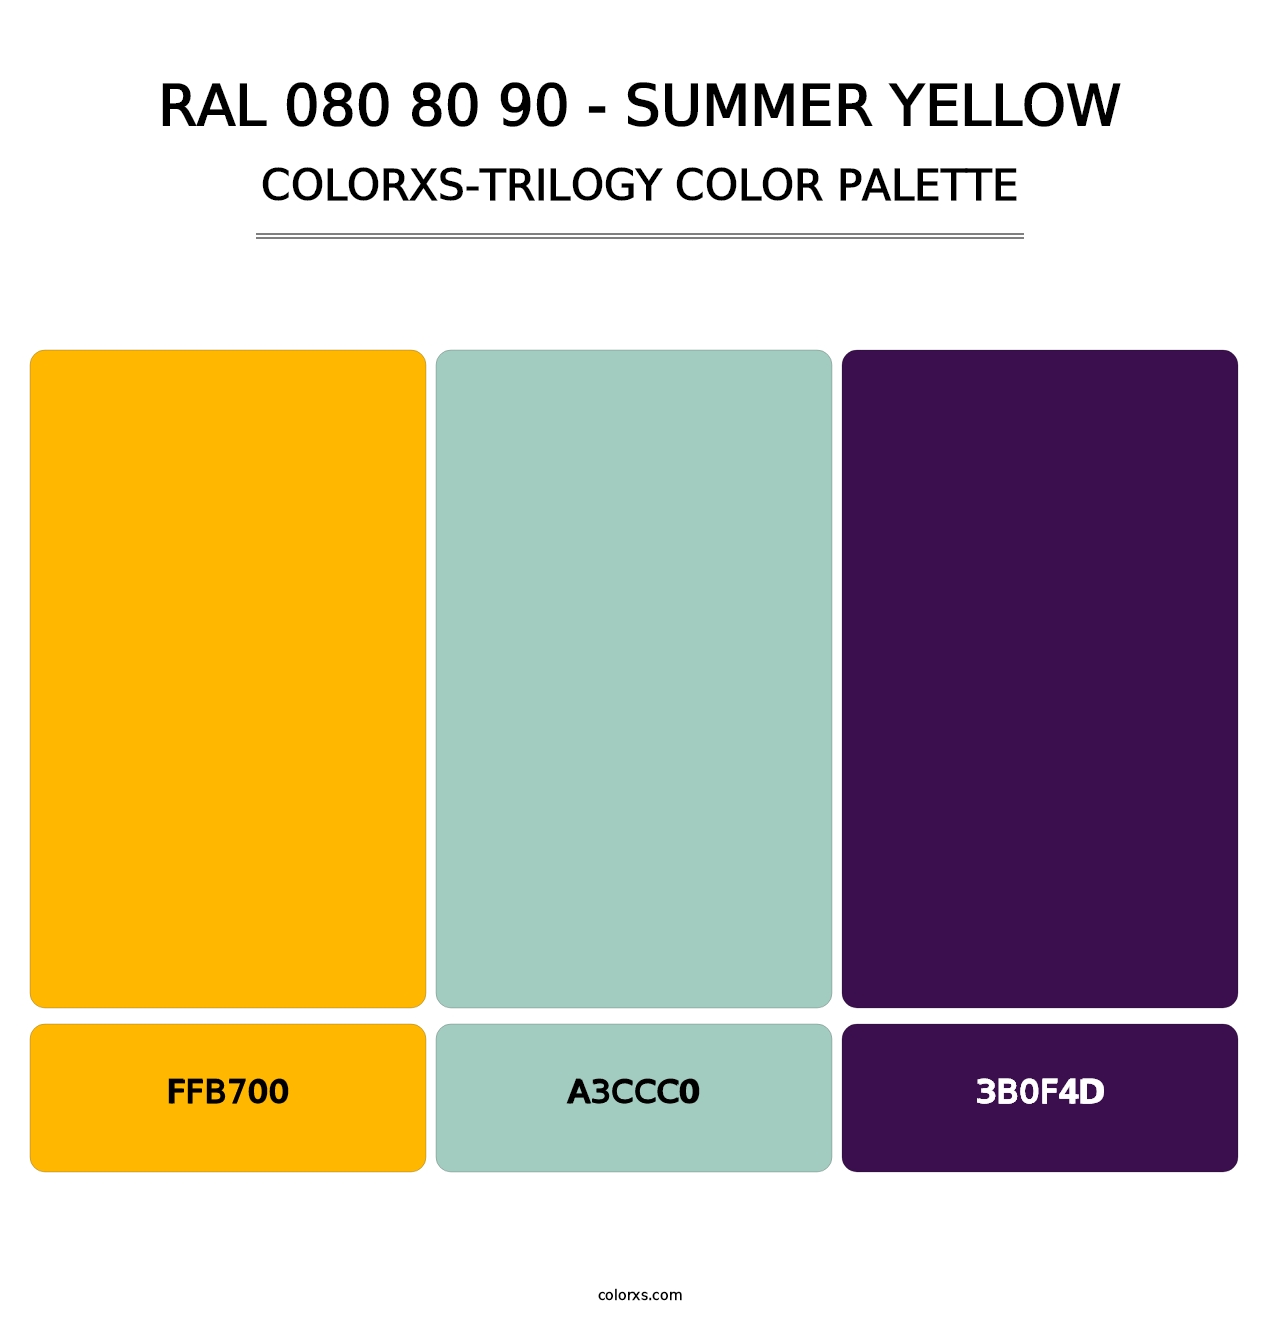 RAL 080 80 90 - Summer Yellow - Colorxs Trilogy Palette